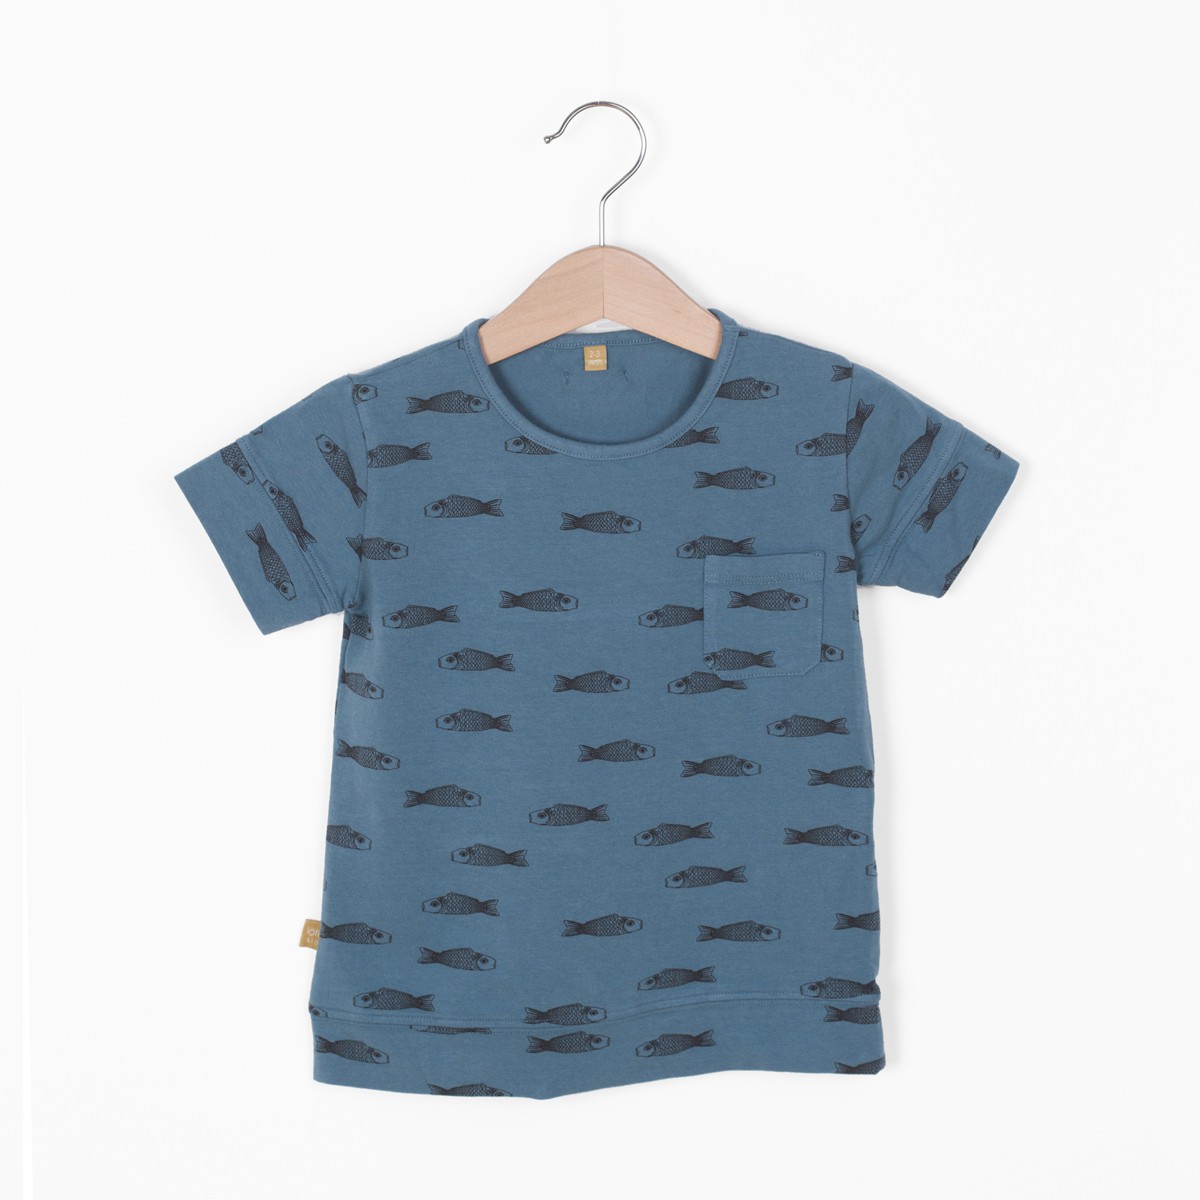 T-shirt fishes